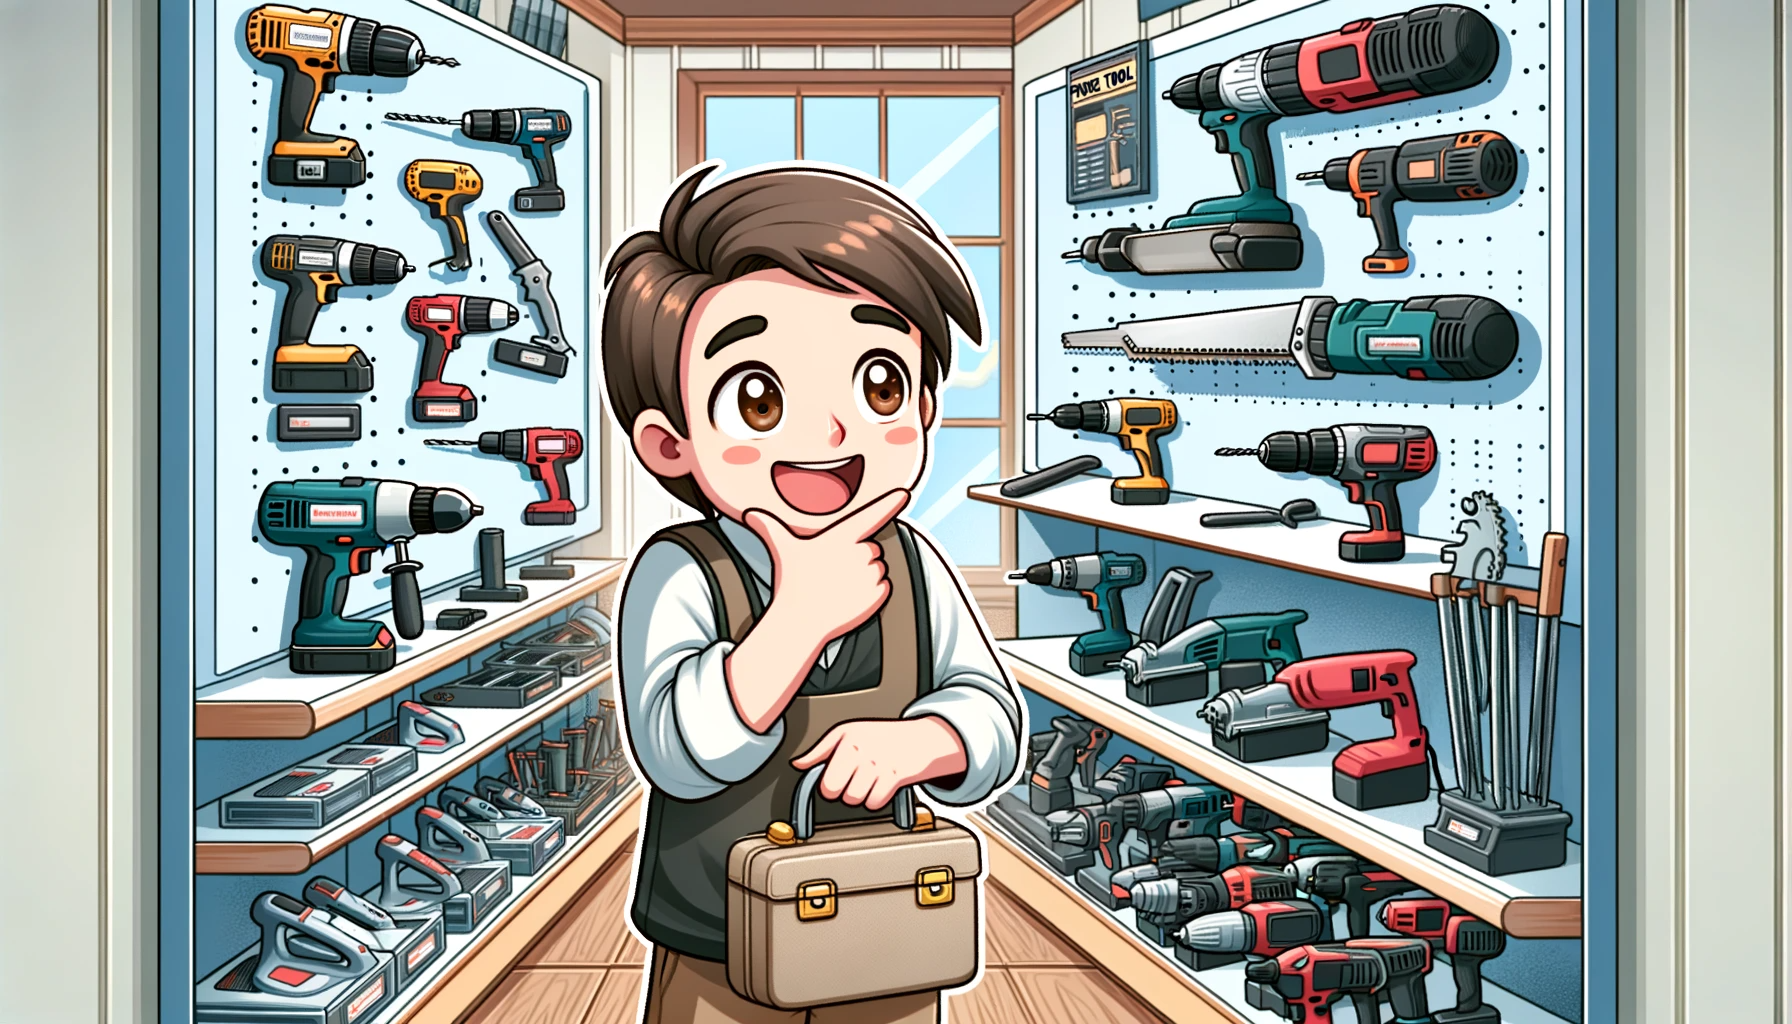  A cartoon-style image depicting a cheerful person in a power tool store, looking at various power tools like drills, saws, and sanders on display shelves. The person appears excited and thoughtful, considering which tool to buy. 